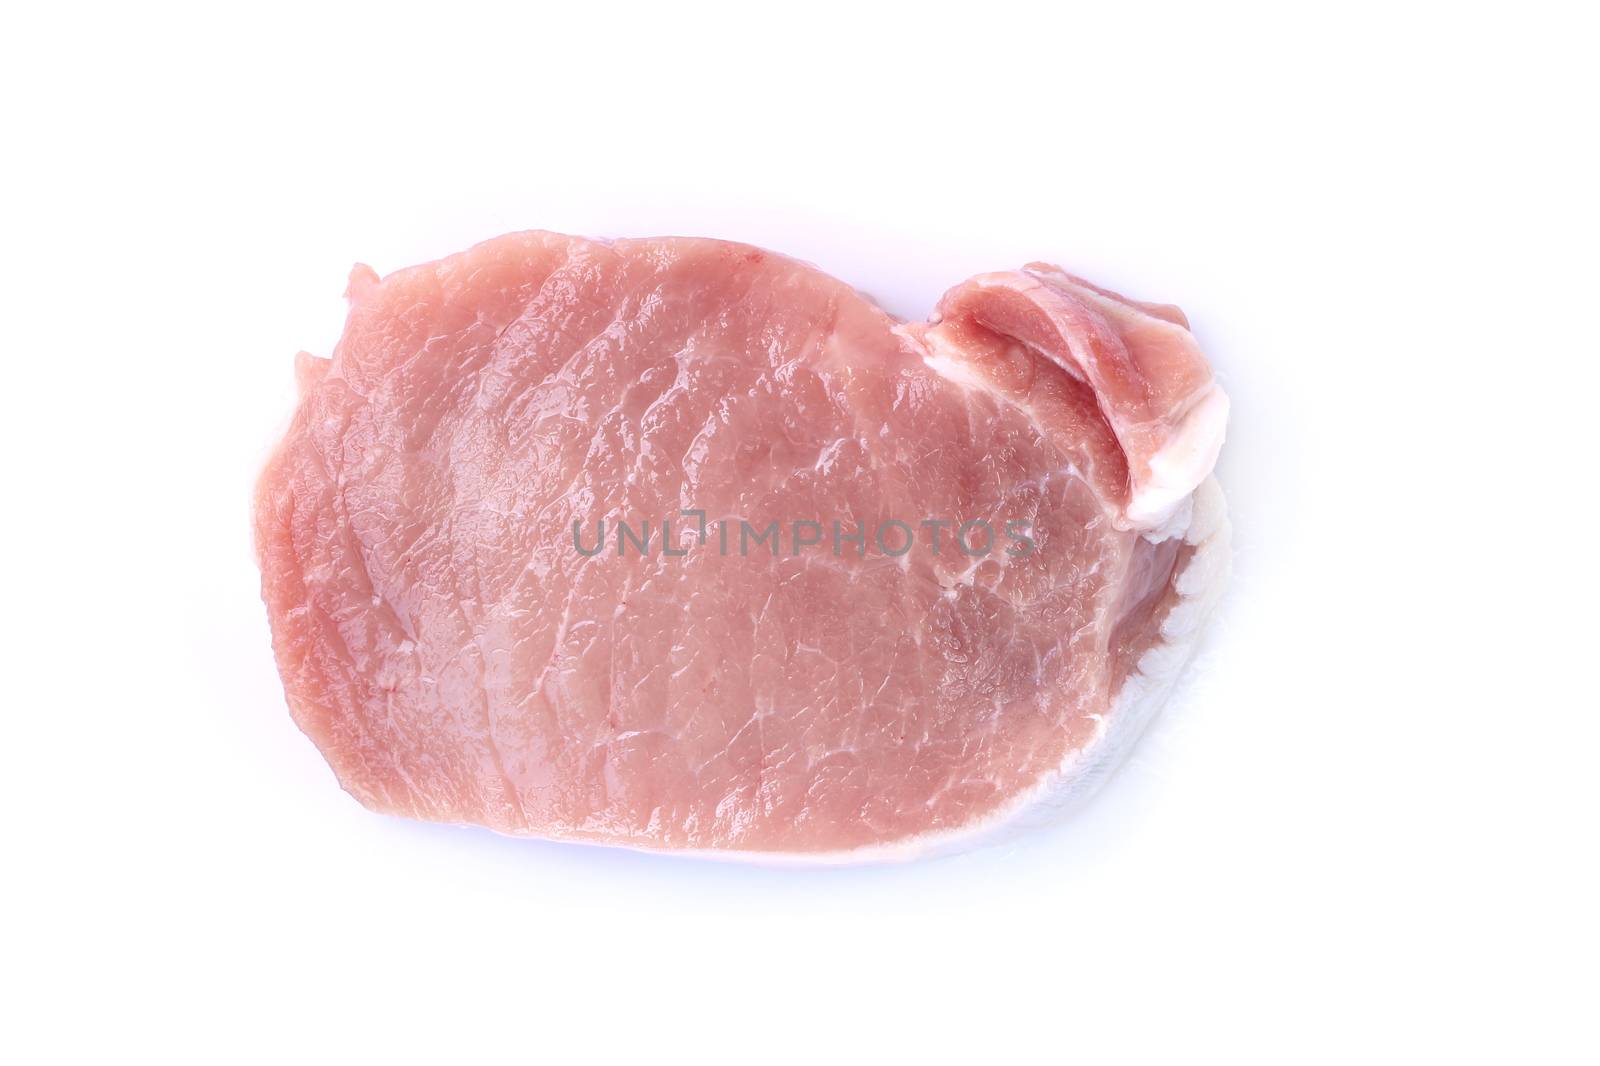 Image of raw meat pork on a white background by yod67